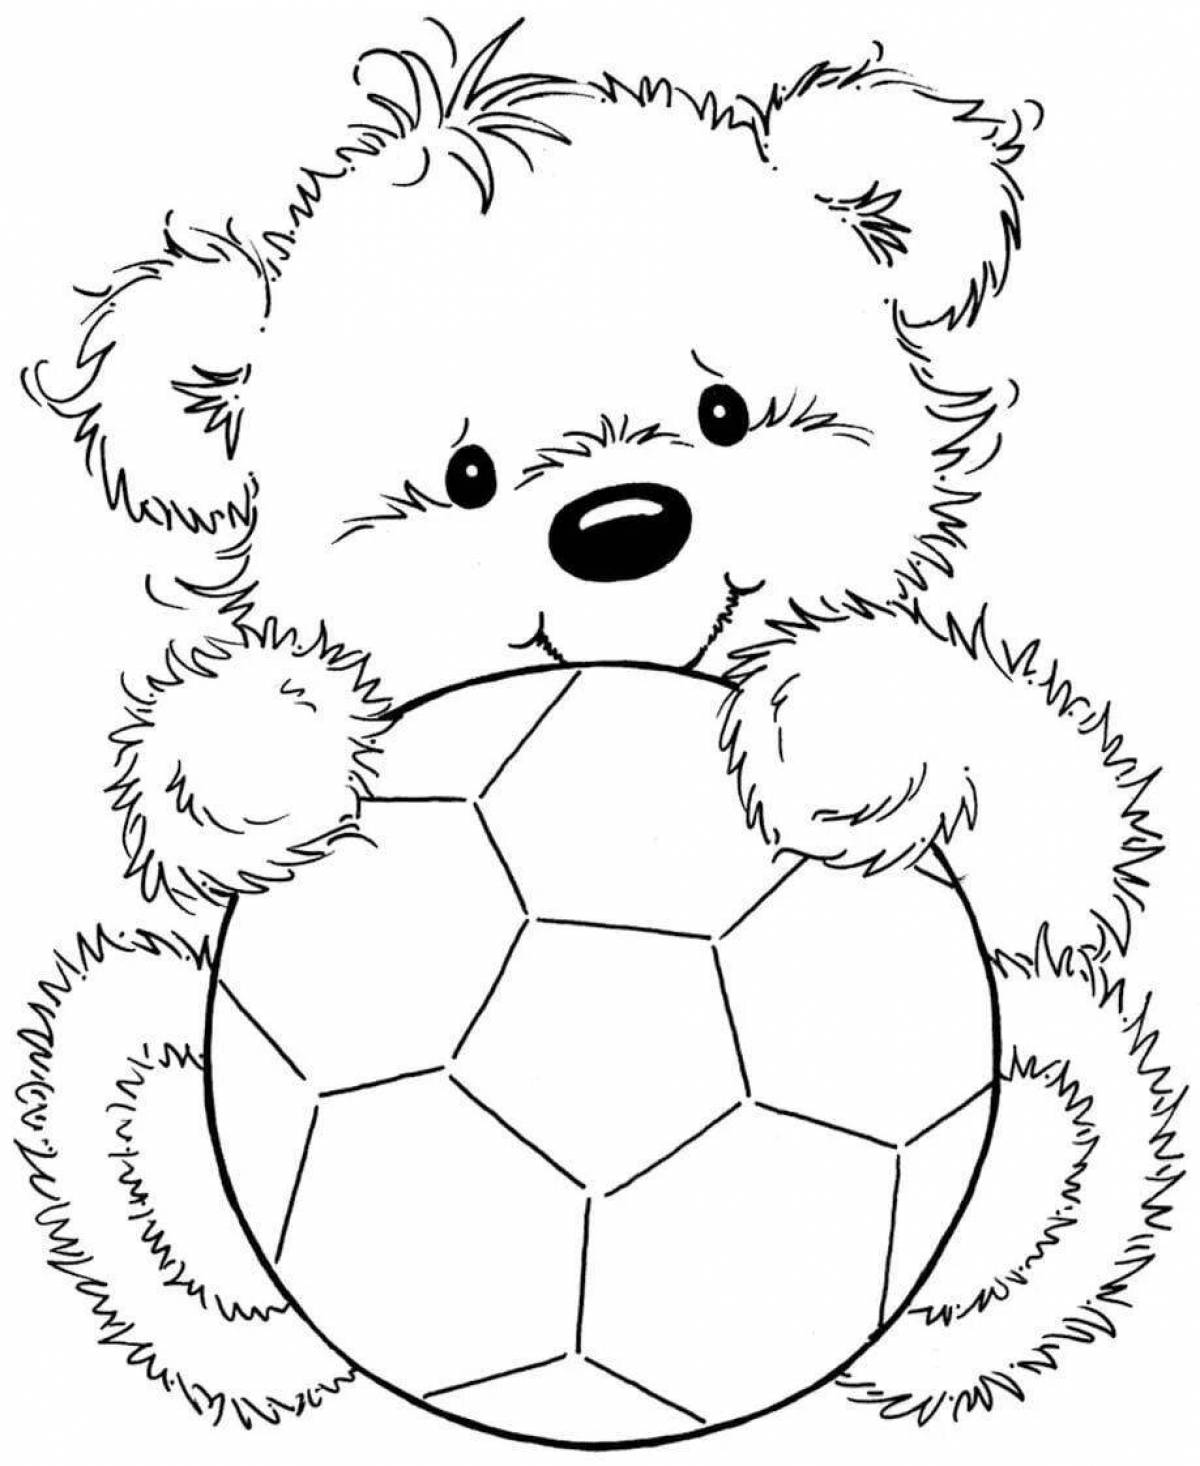 Soft teddy bear coloring page